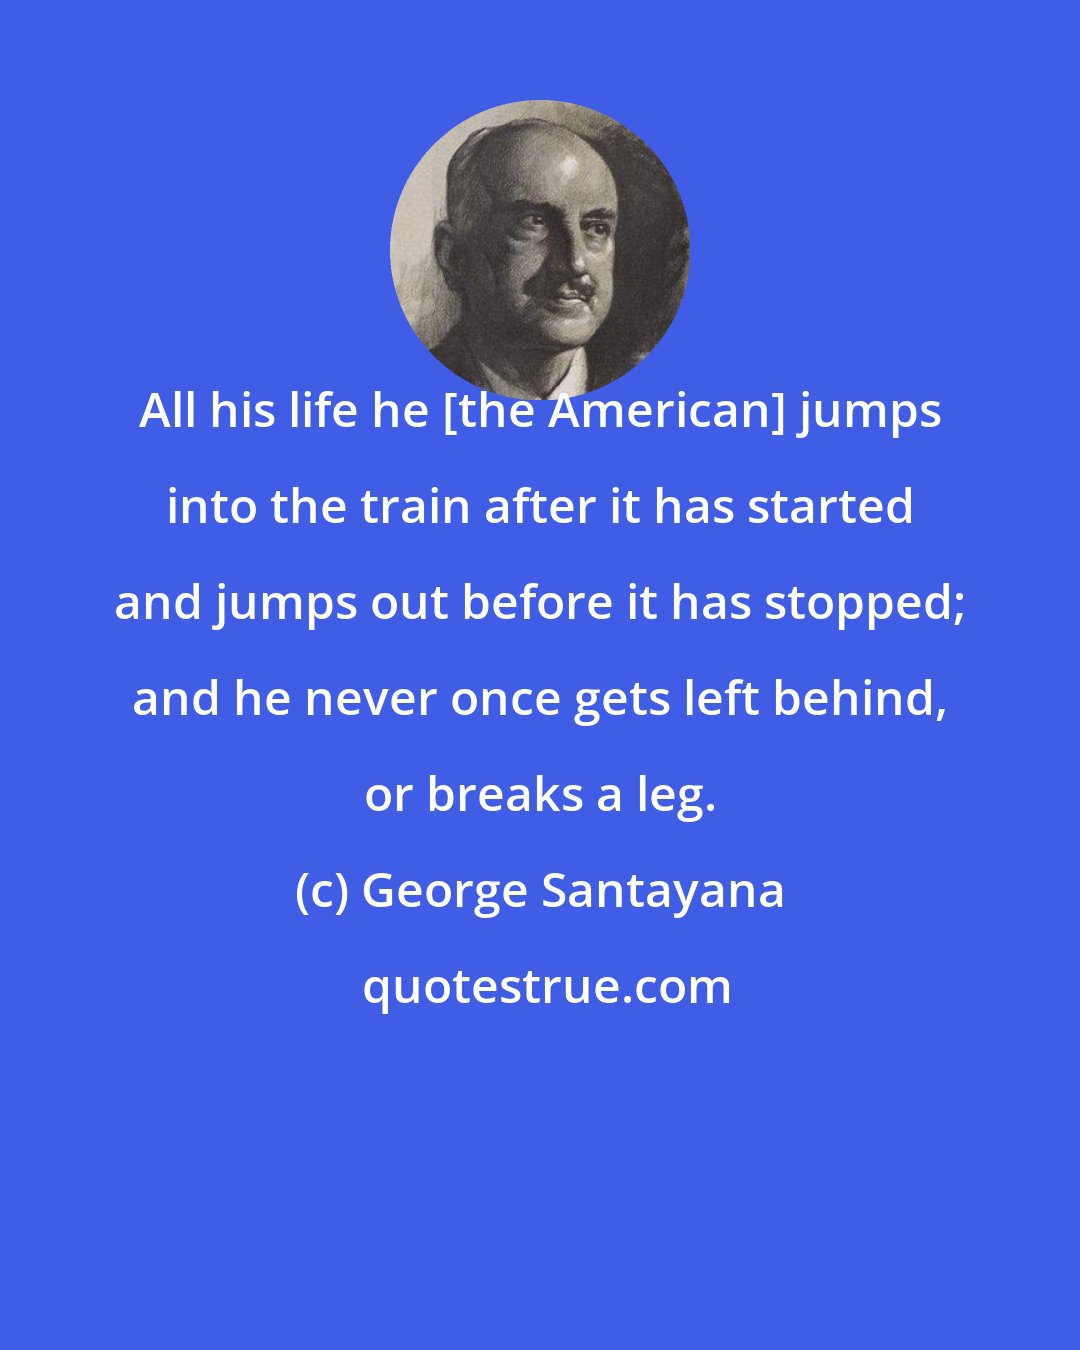 George Santayana: All his life he [the American] jumps into the train after it has started and jumps out before it has stopped; and he never once gets left behind, or breaks a leg.